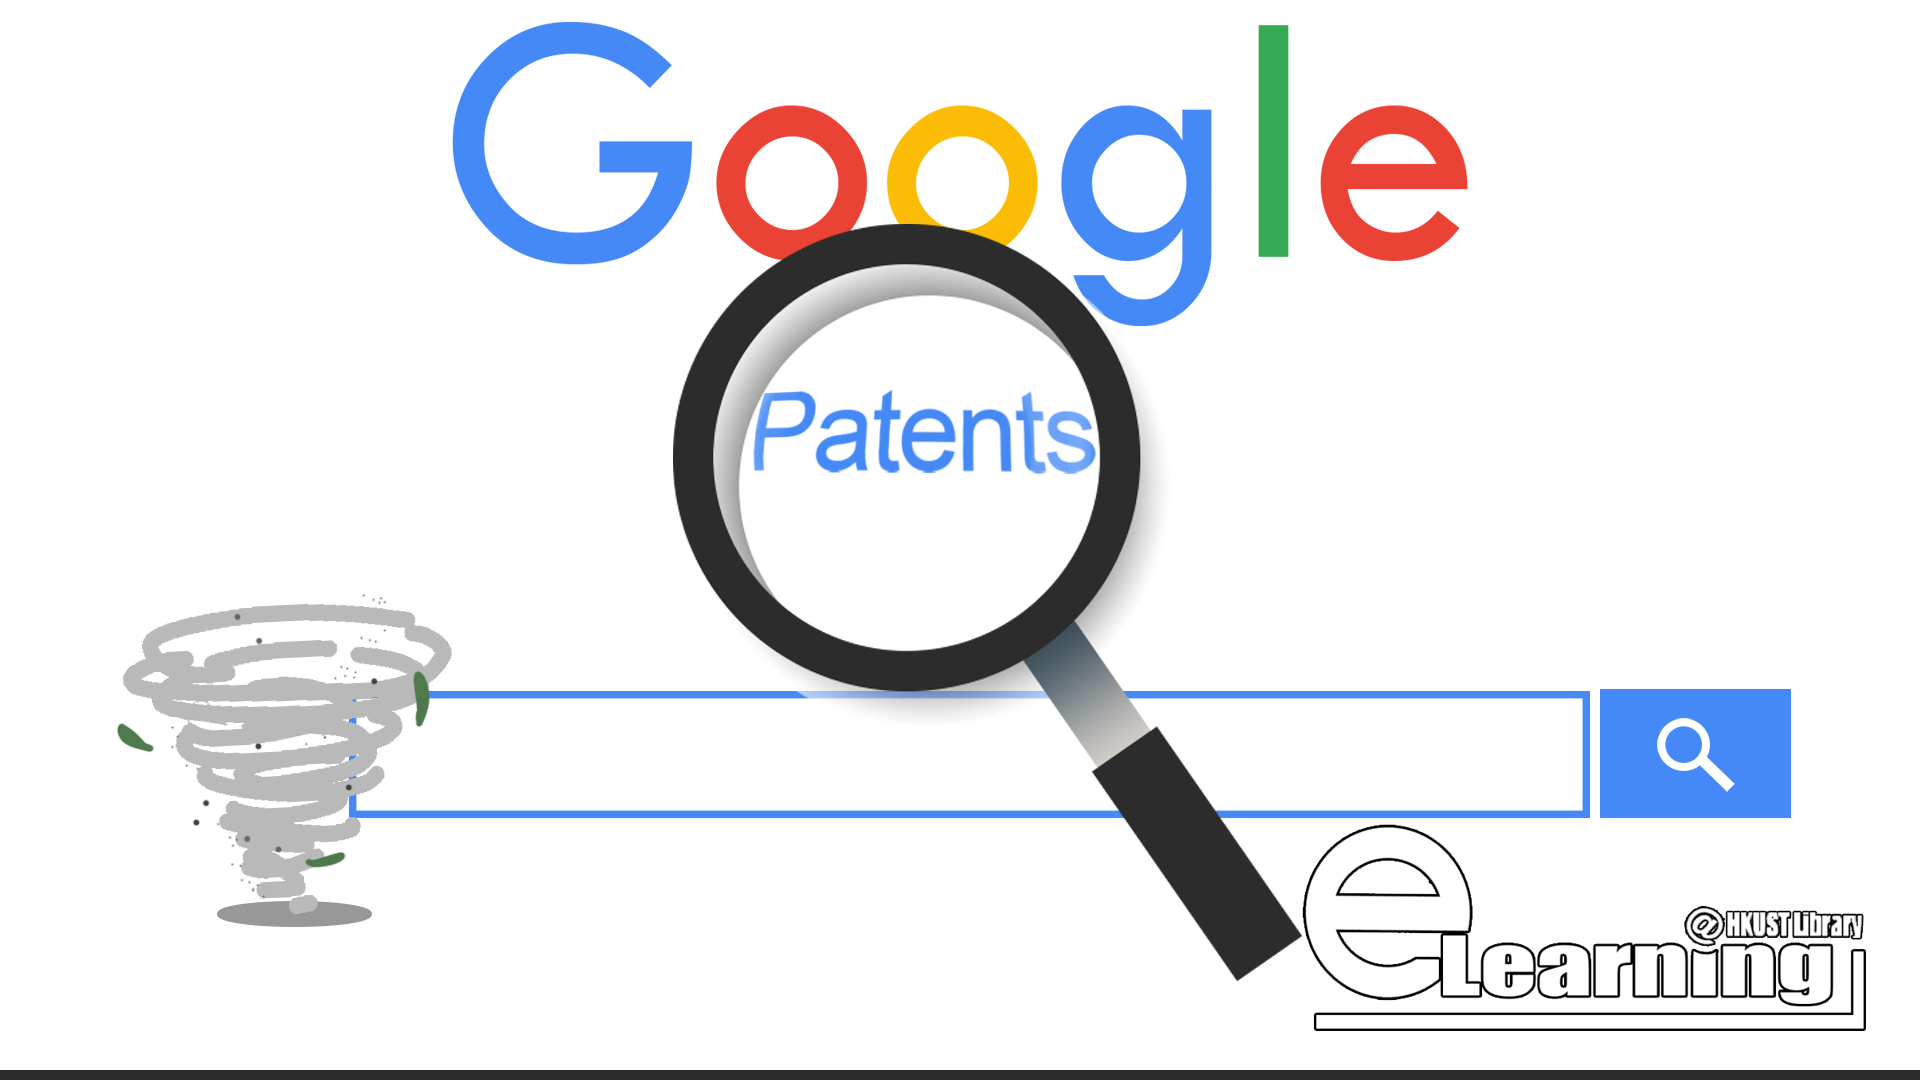 Why and How to use Google Patent Search​ - Hurricane(00:03:20)